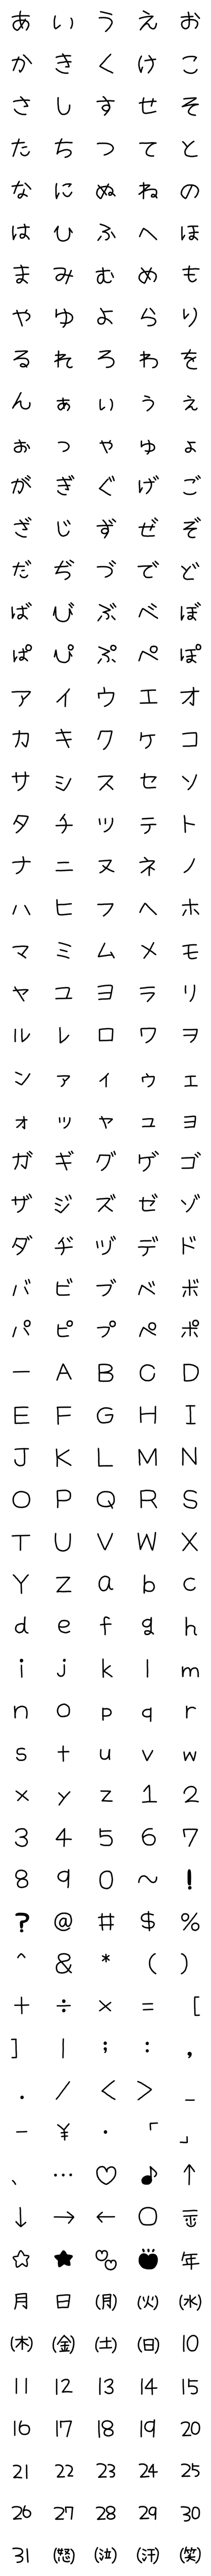 [LINE絵文字]女の子癖字フォント デコ絵文字の画像一覧